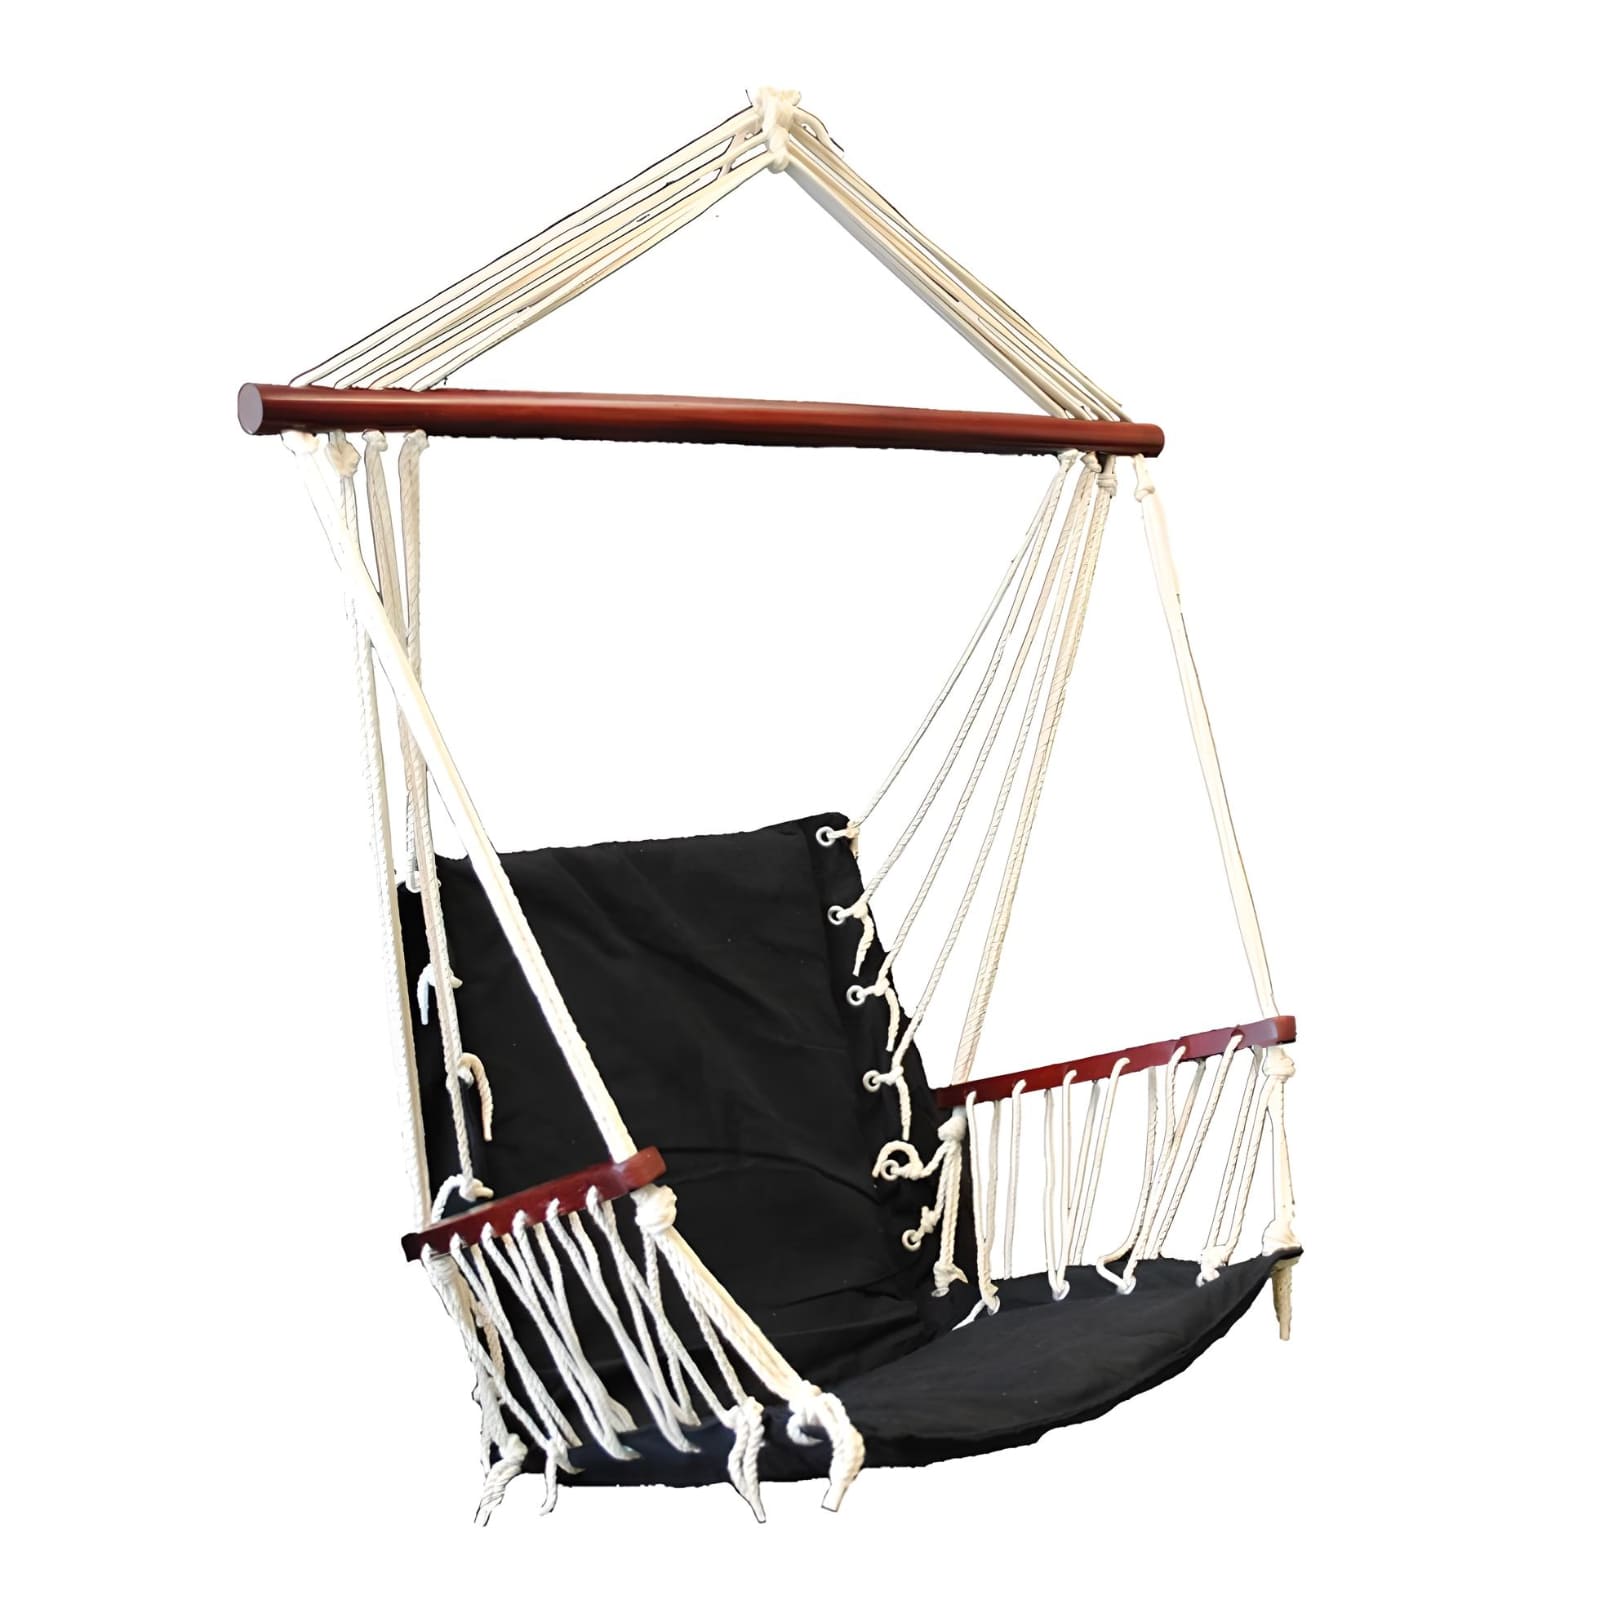 black-in-hanging-hammock-chair-with-wooden-arm-rests